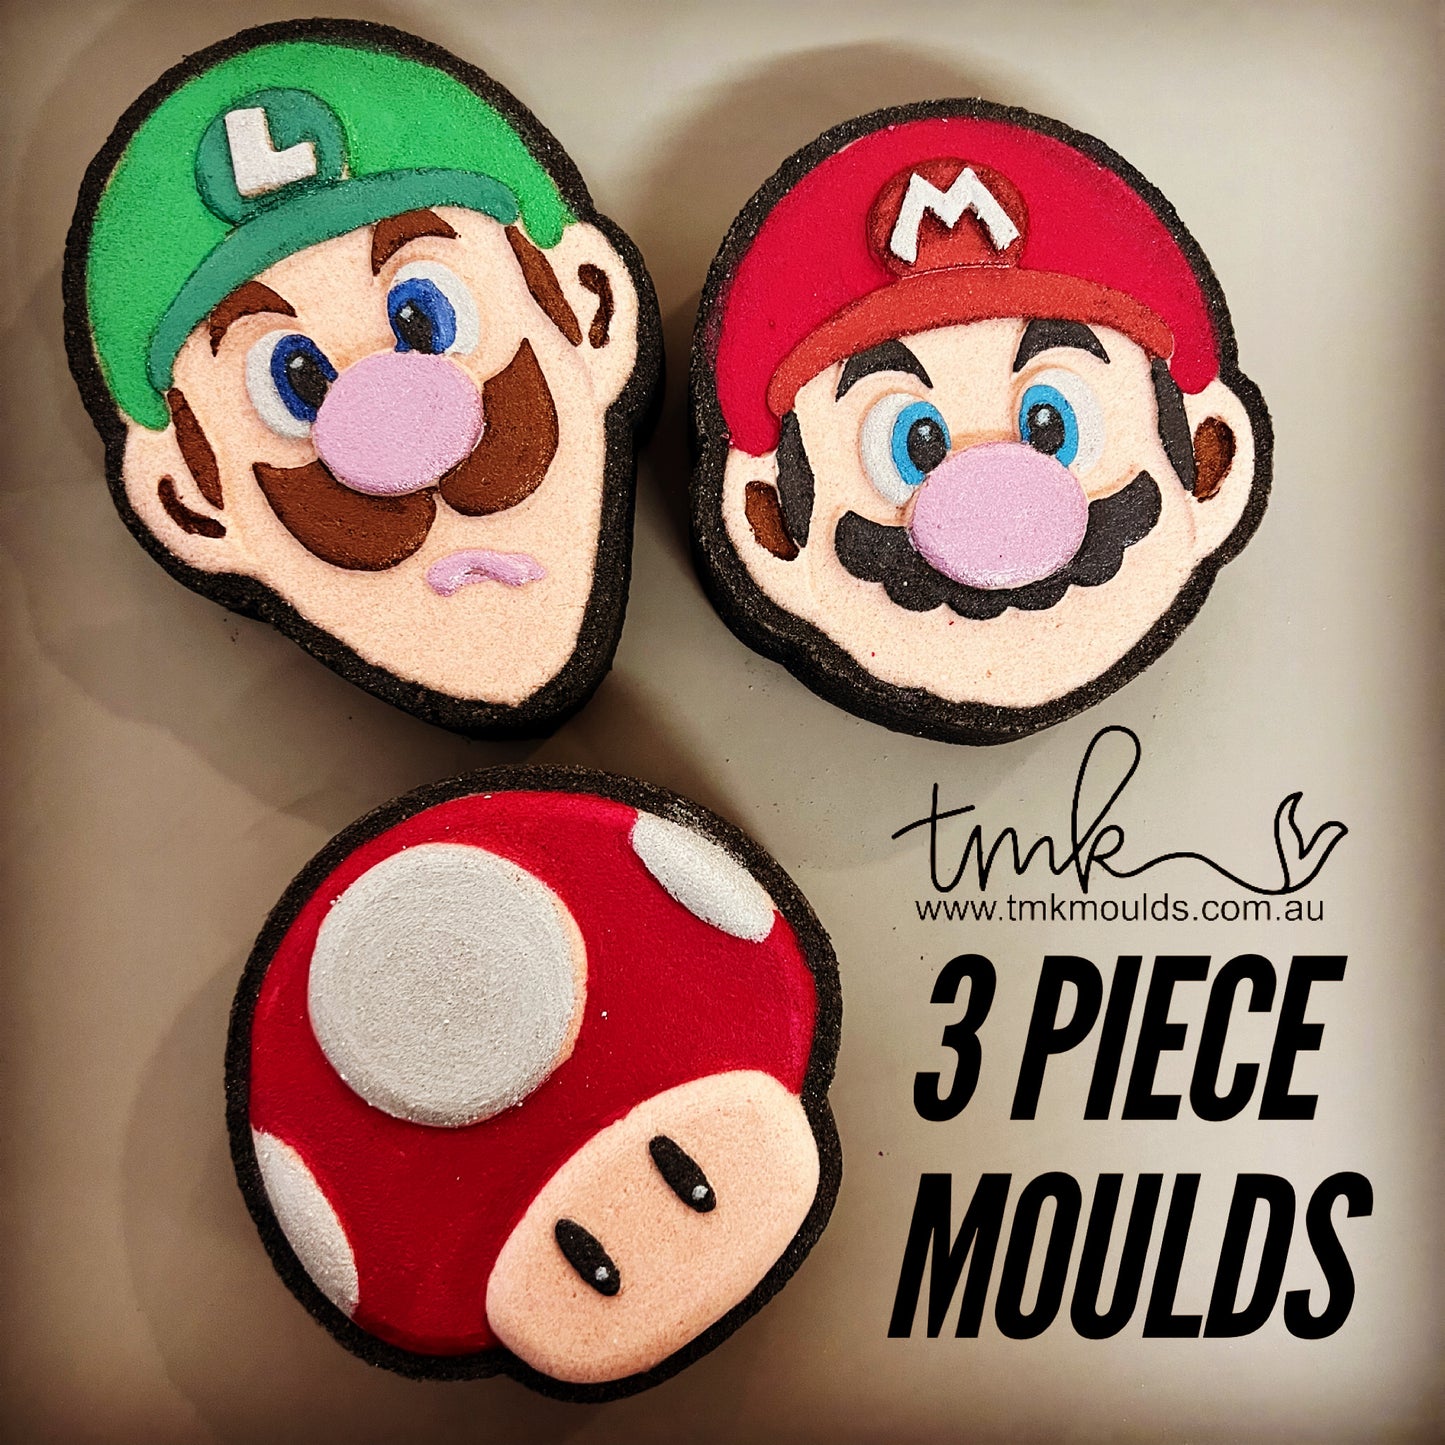 Plumber, His Brother and a Mushroom 3 piece Moulds